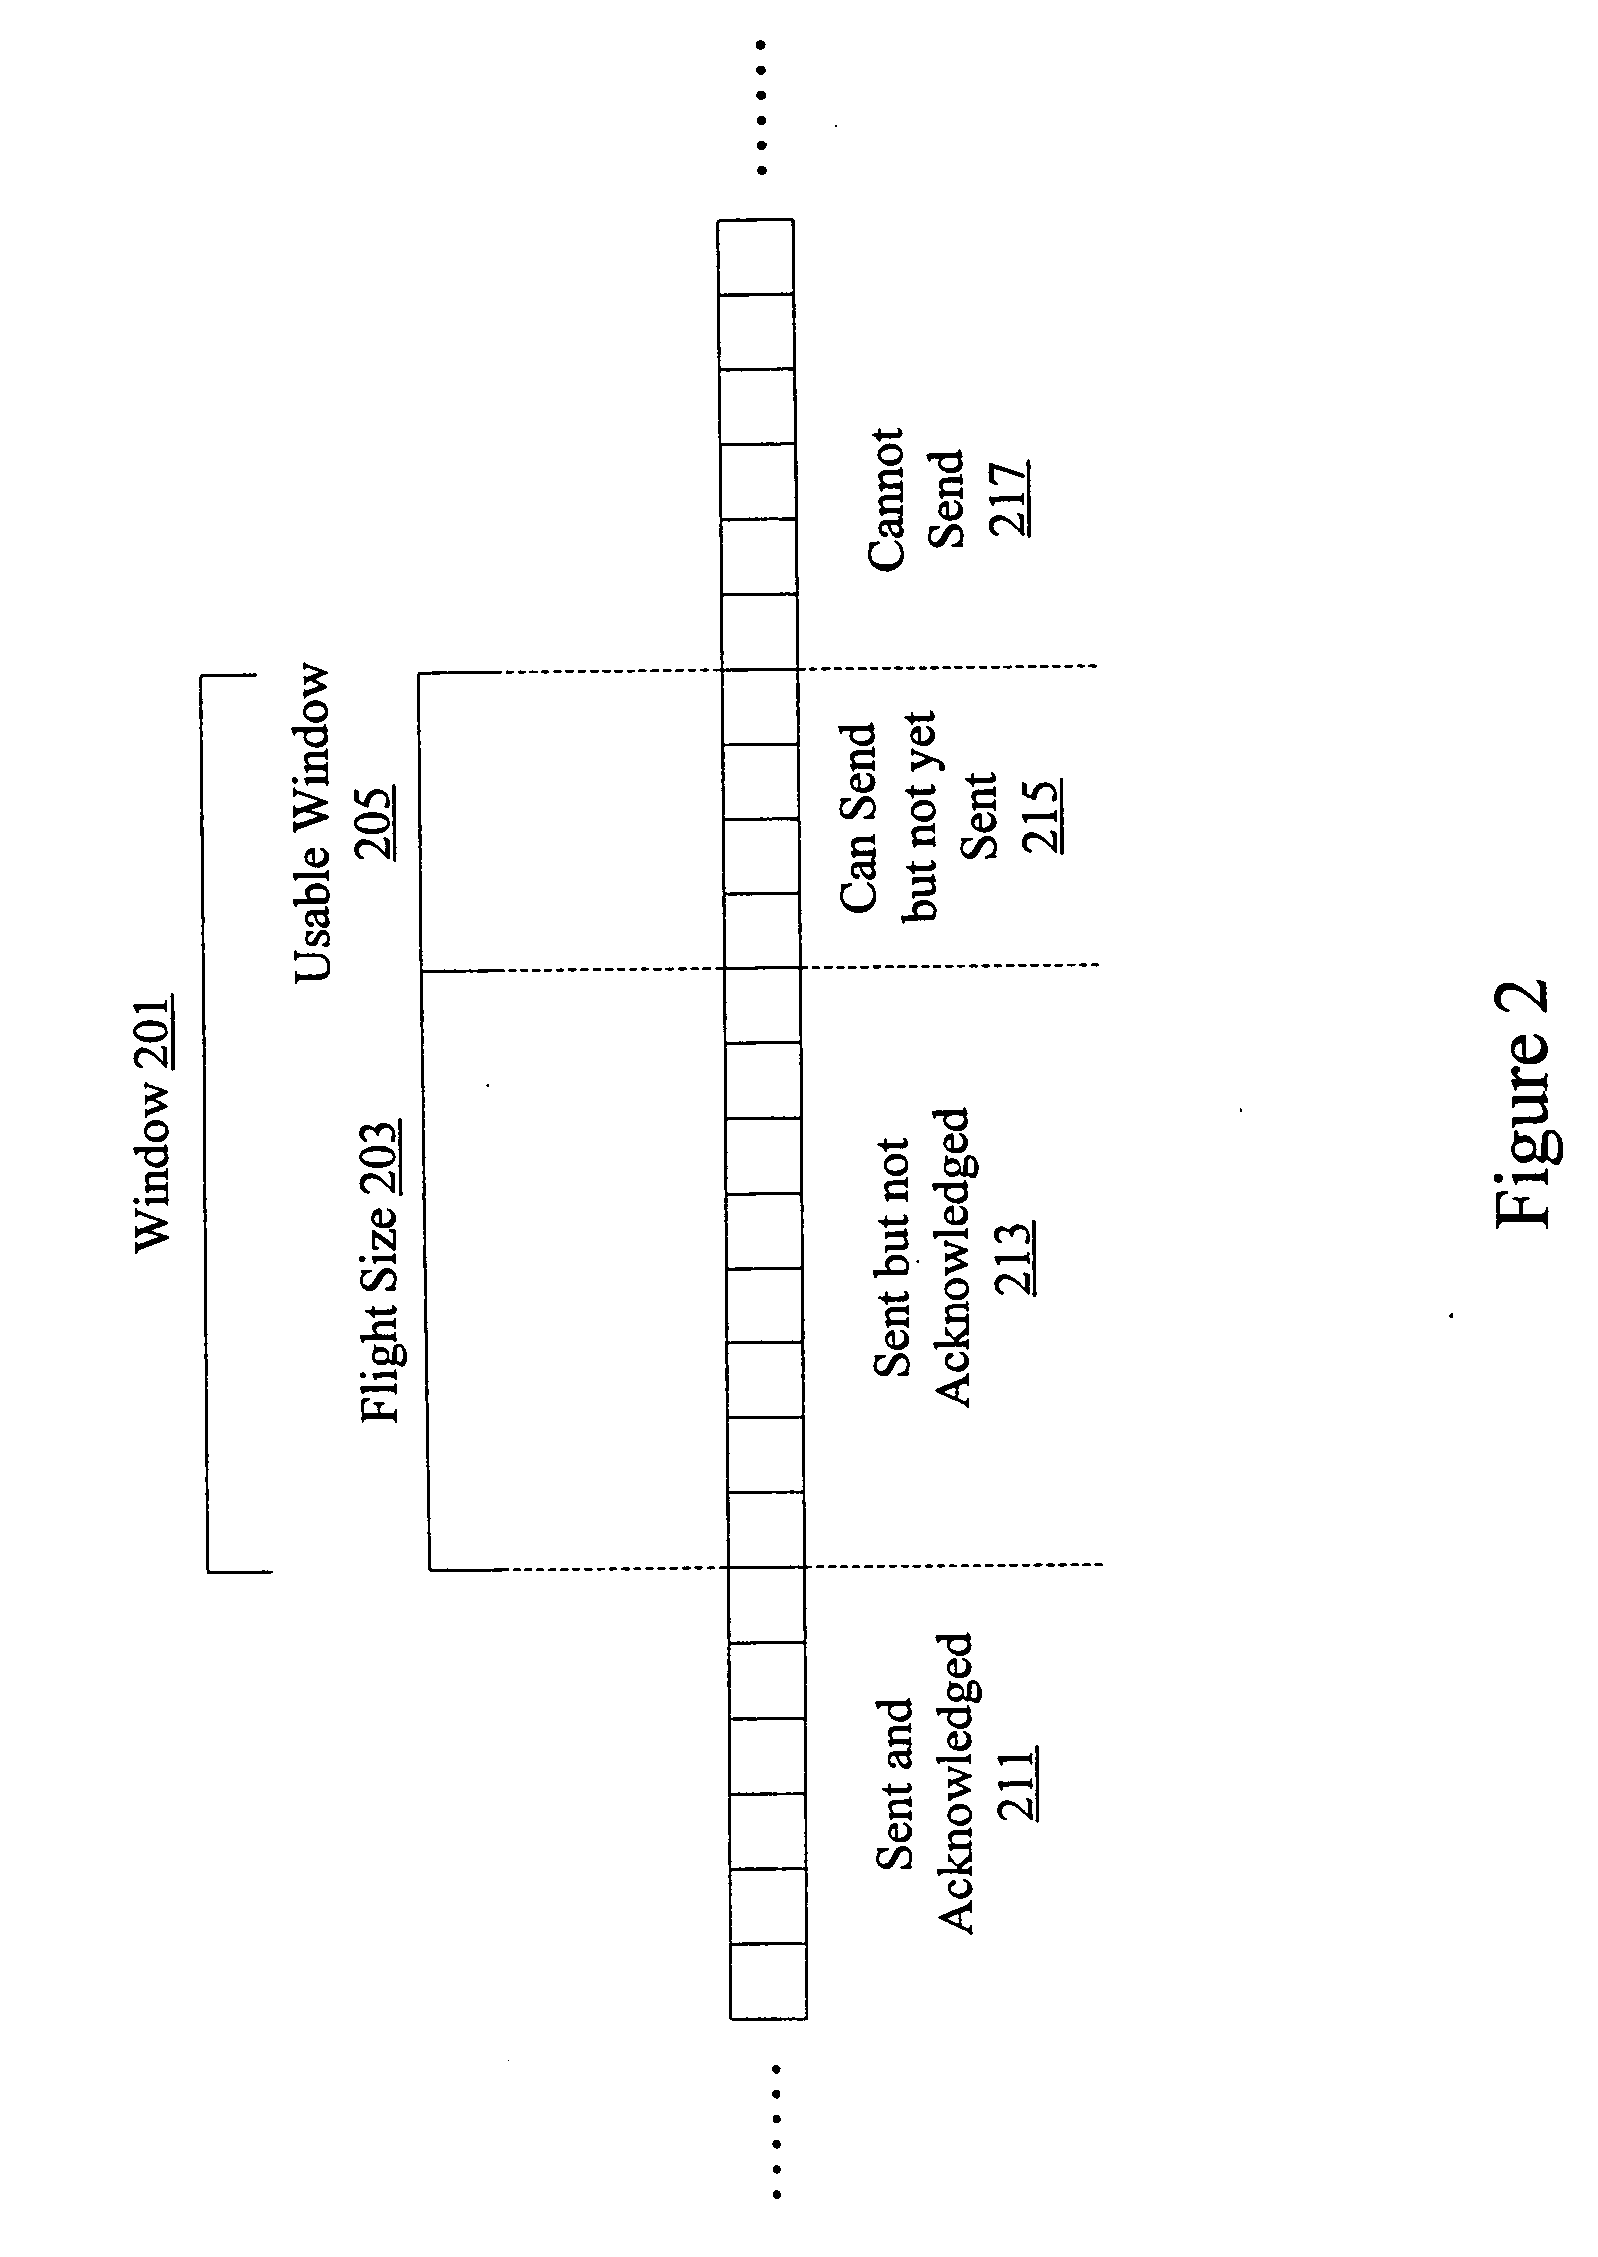 Transmission control protocol (TCP) congestion control using transmission delay components